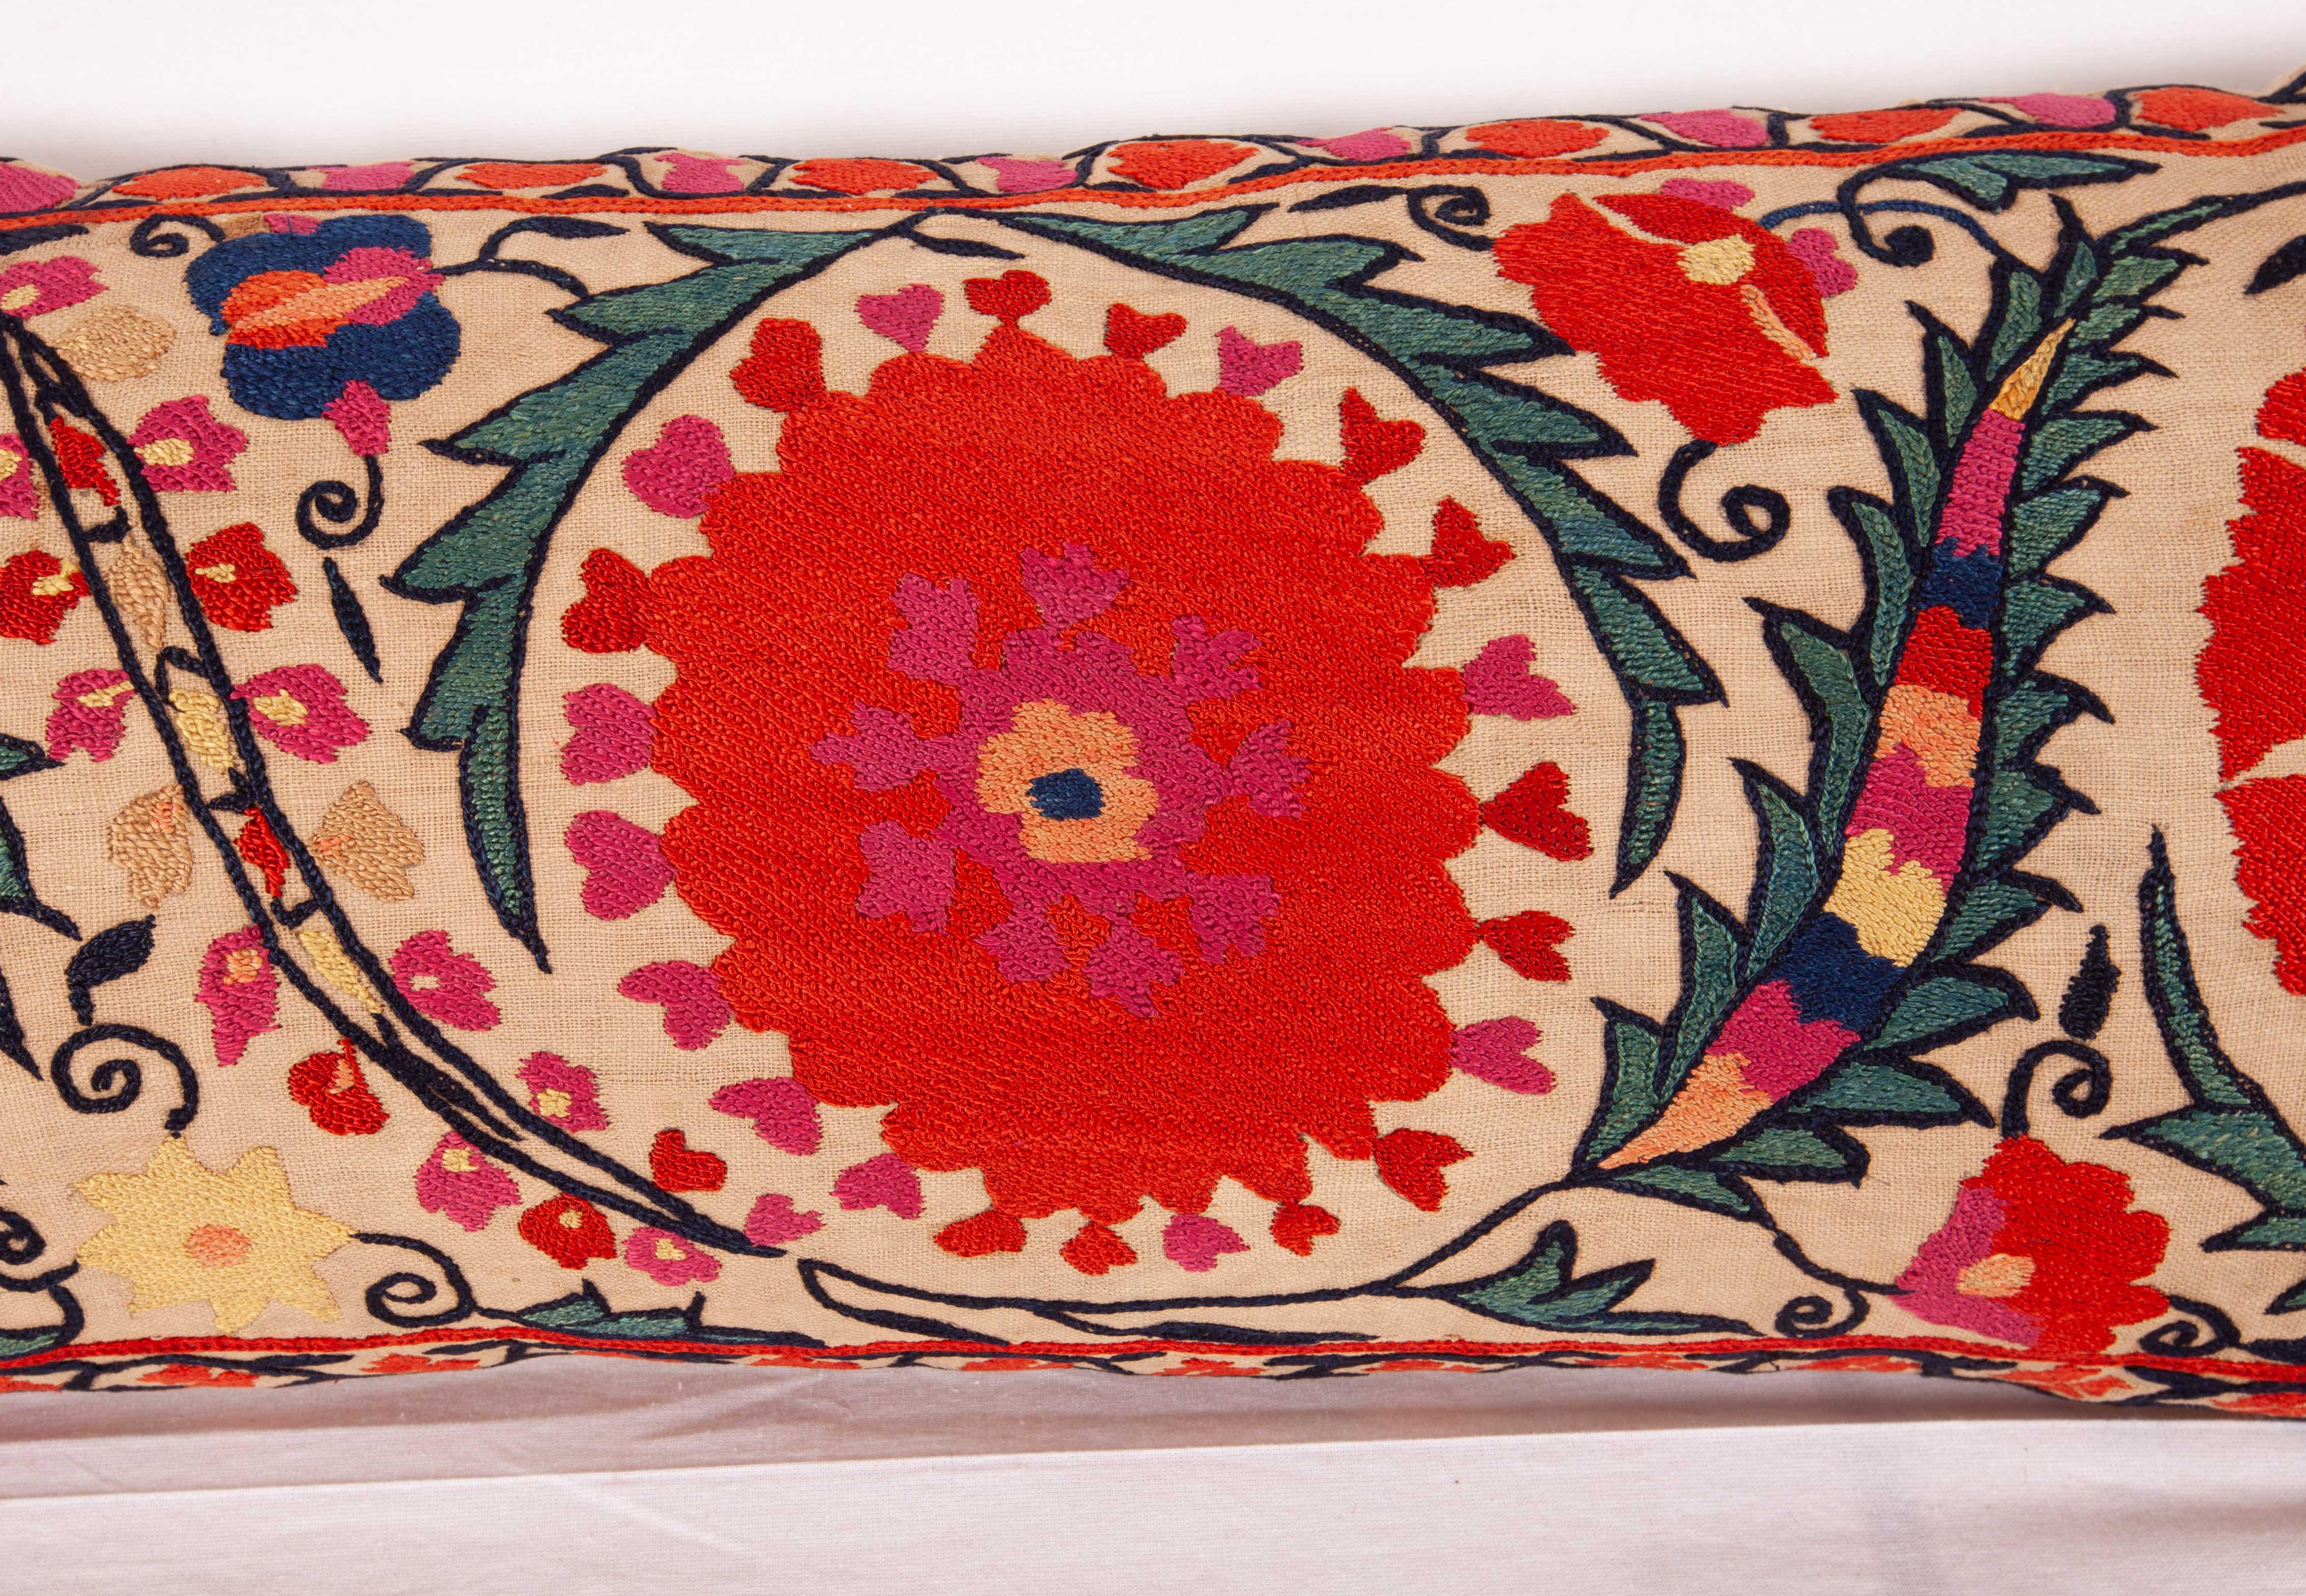 Embroidered Antique Suzani Lumbar Pillow Made from a Mid-19th Century Nurata Suzani